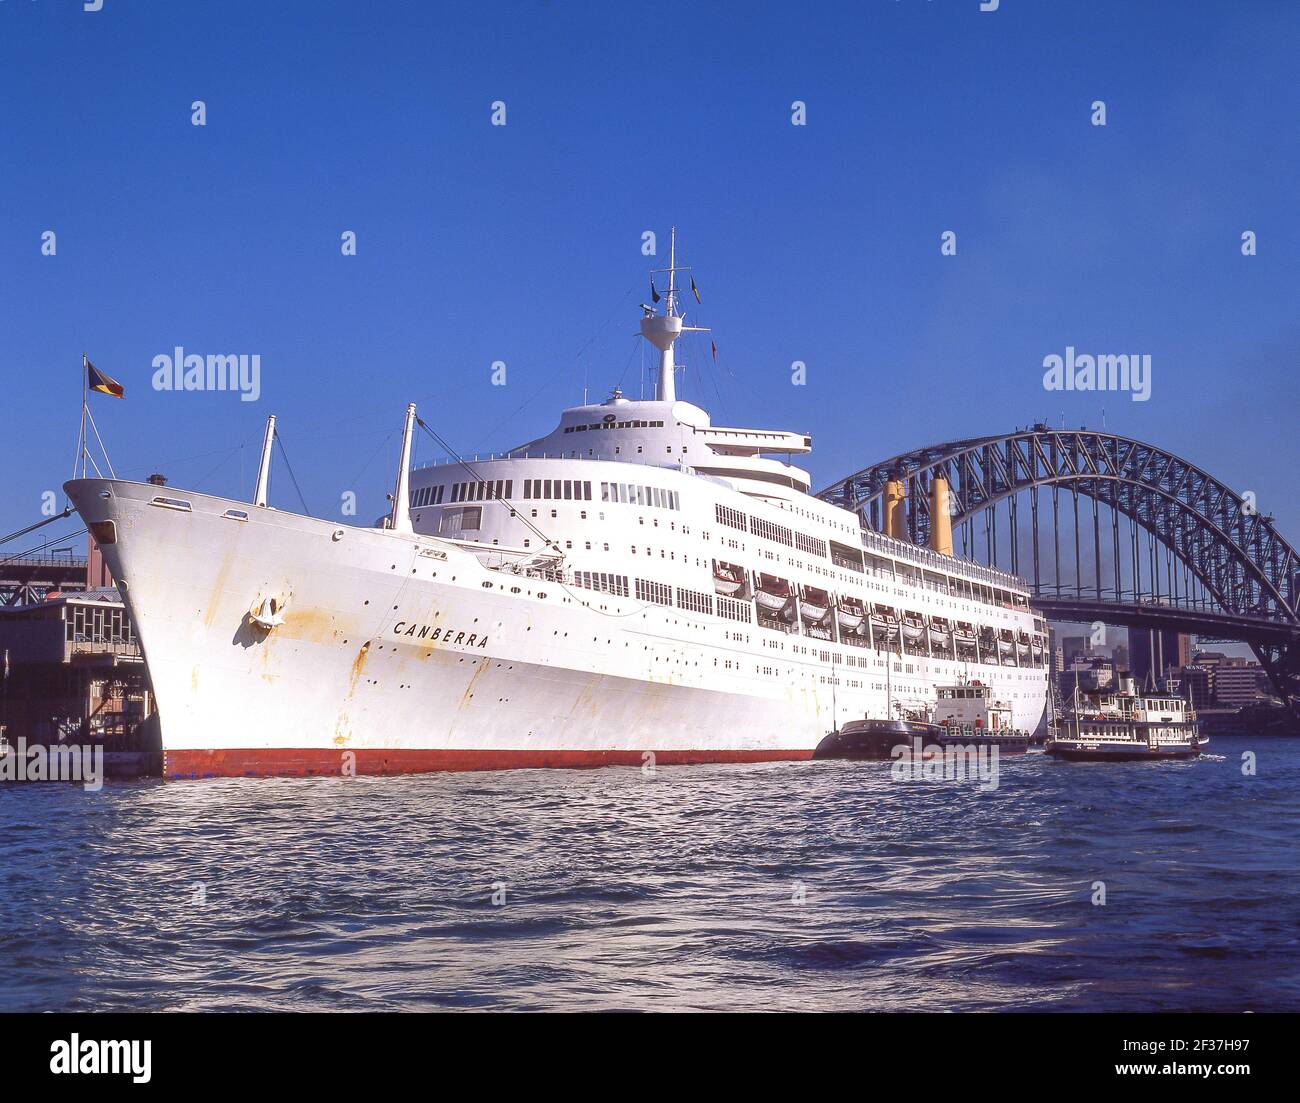 Former P&O Canberra cruise ship berthed at Circular Quay, Sydney Harbour, Sydney, New South Wales, Australia Stock Photo